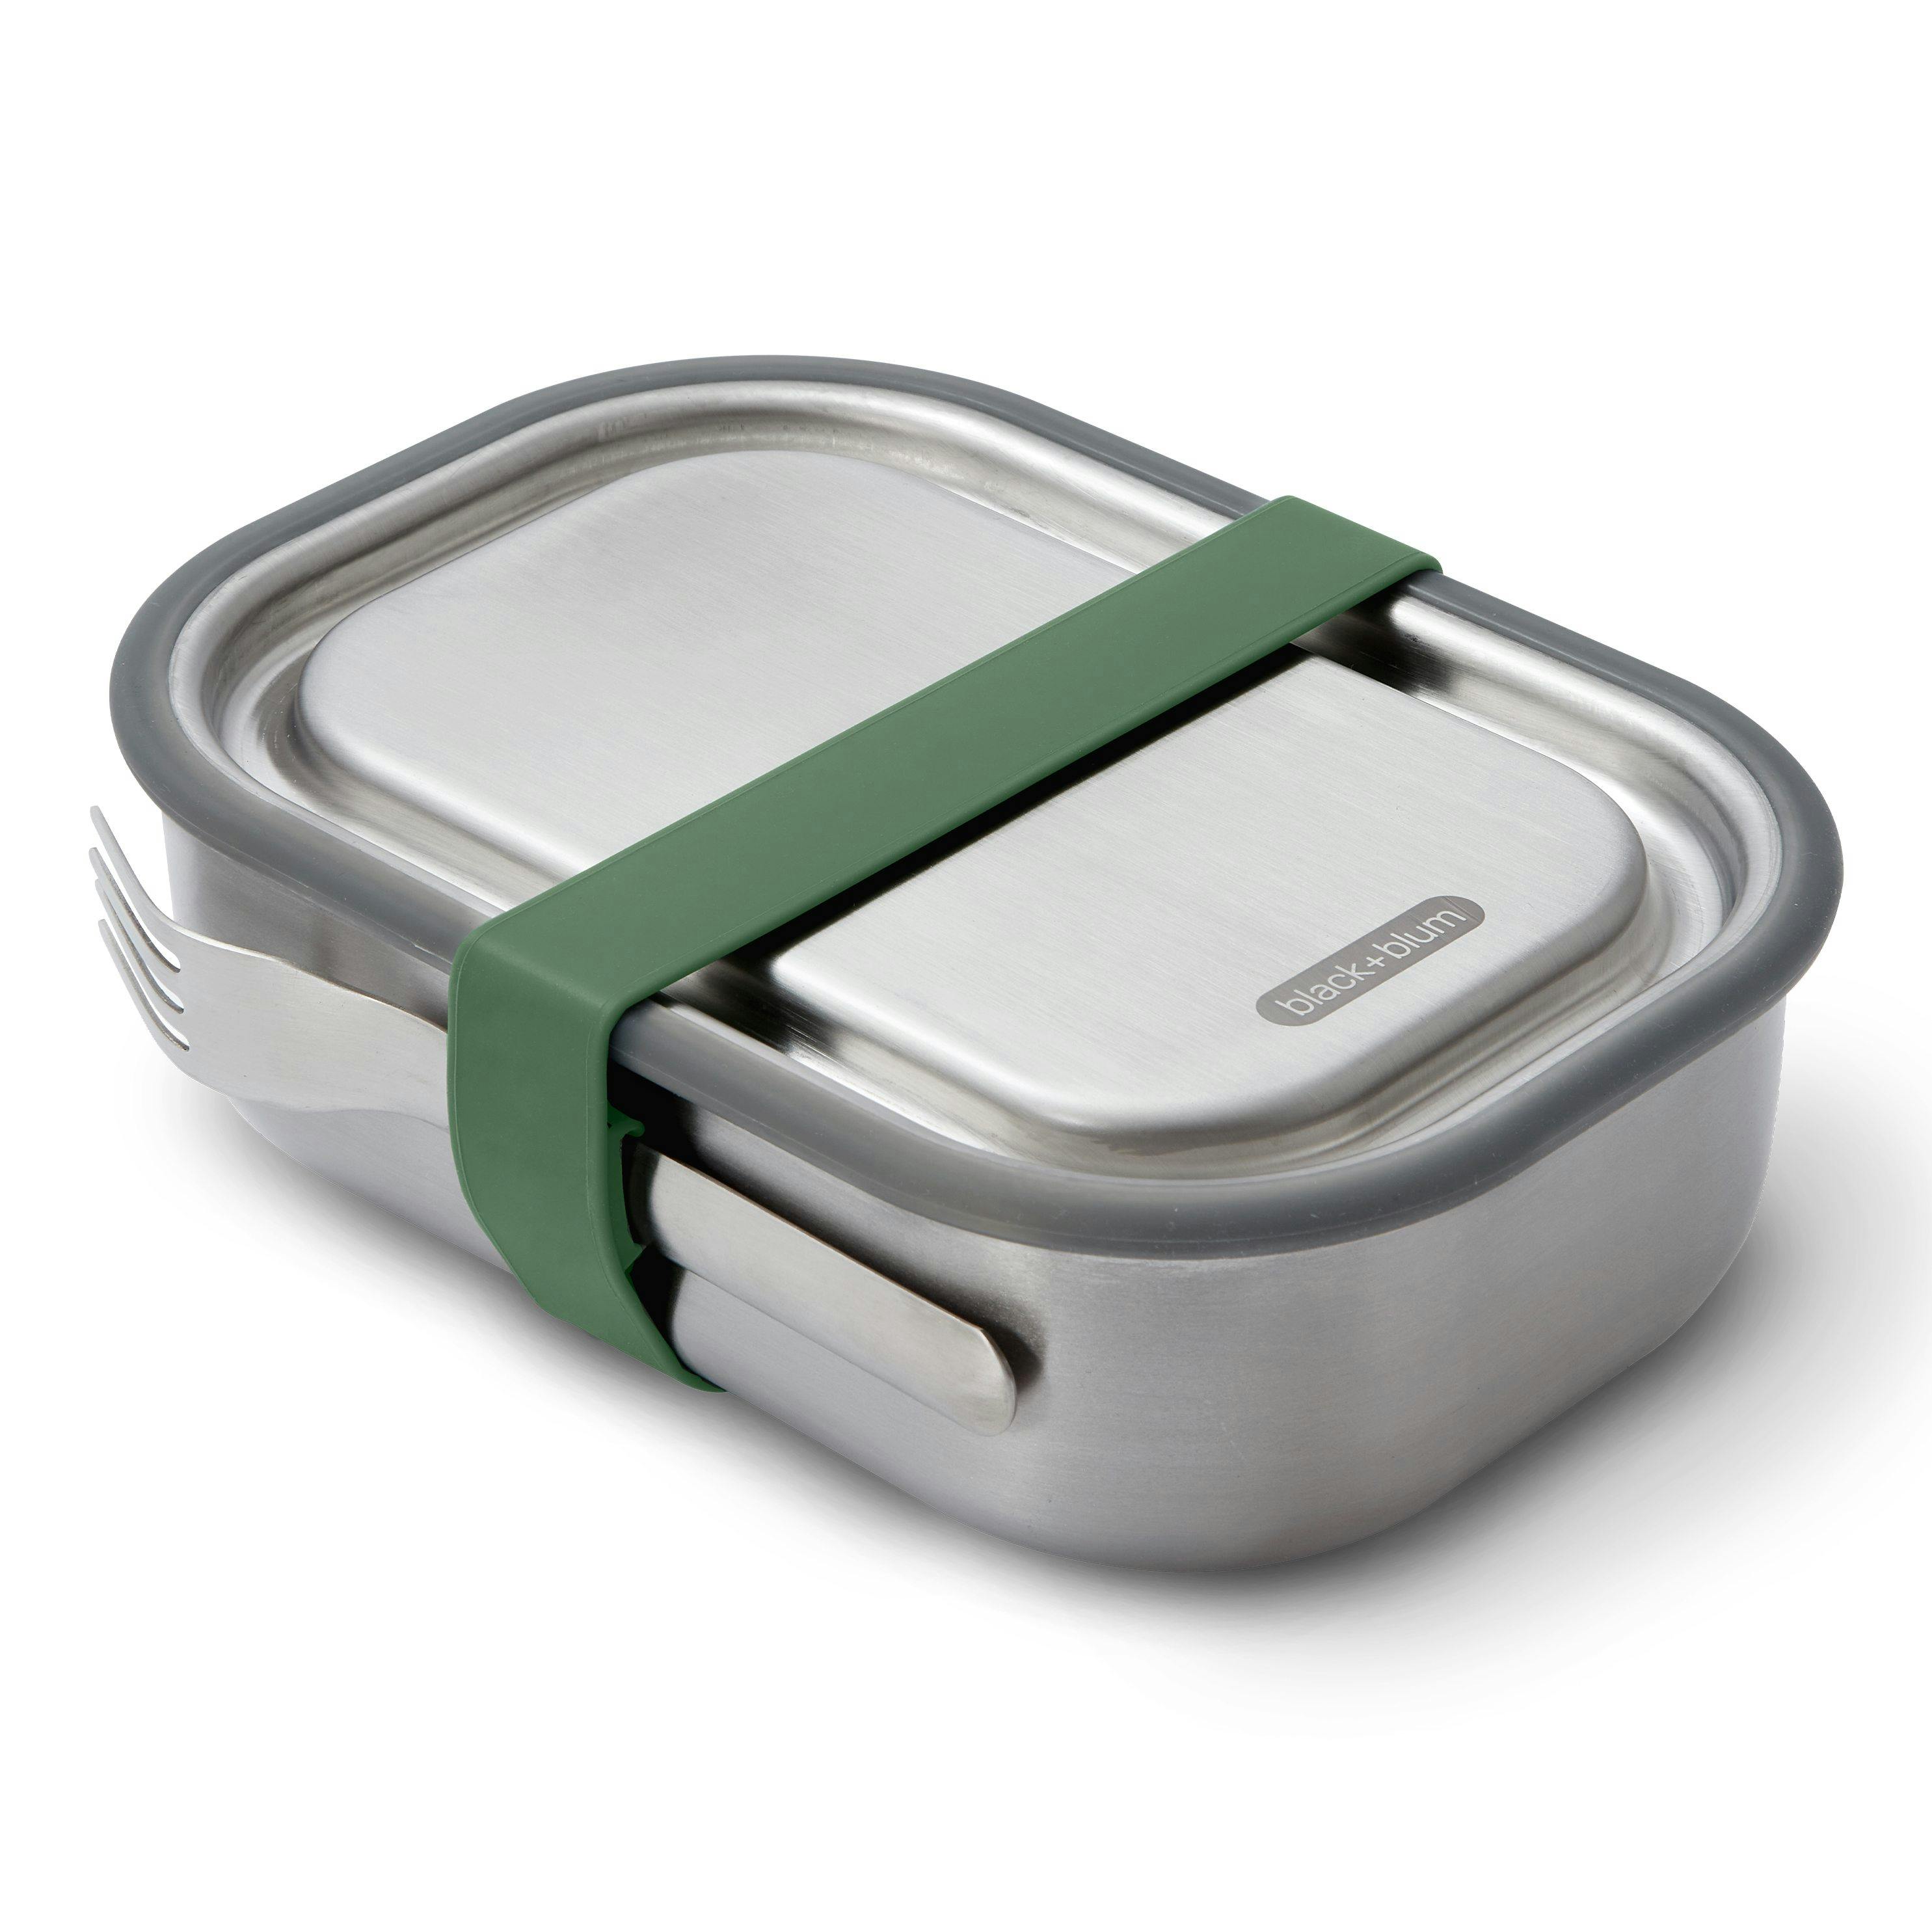 Naturegr Lunch Box Lunch Box Large Capacity Leak-proof Stainless